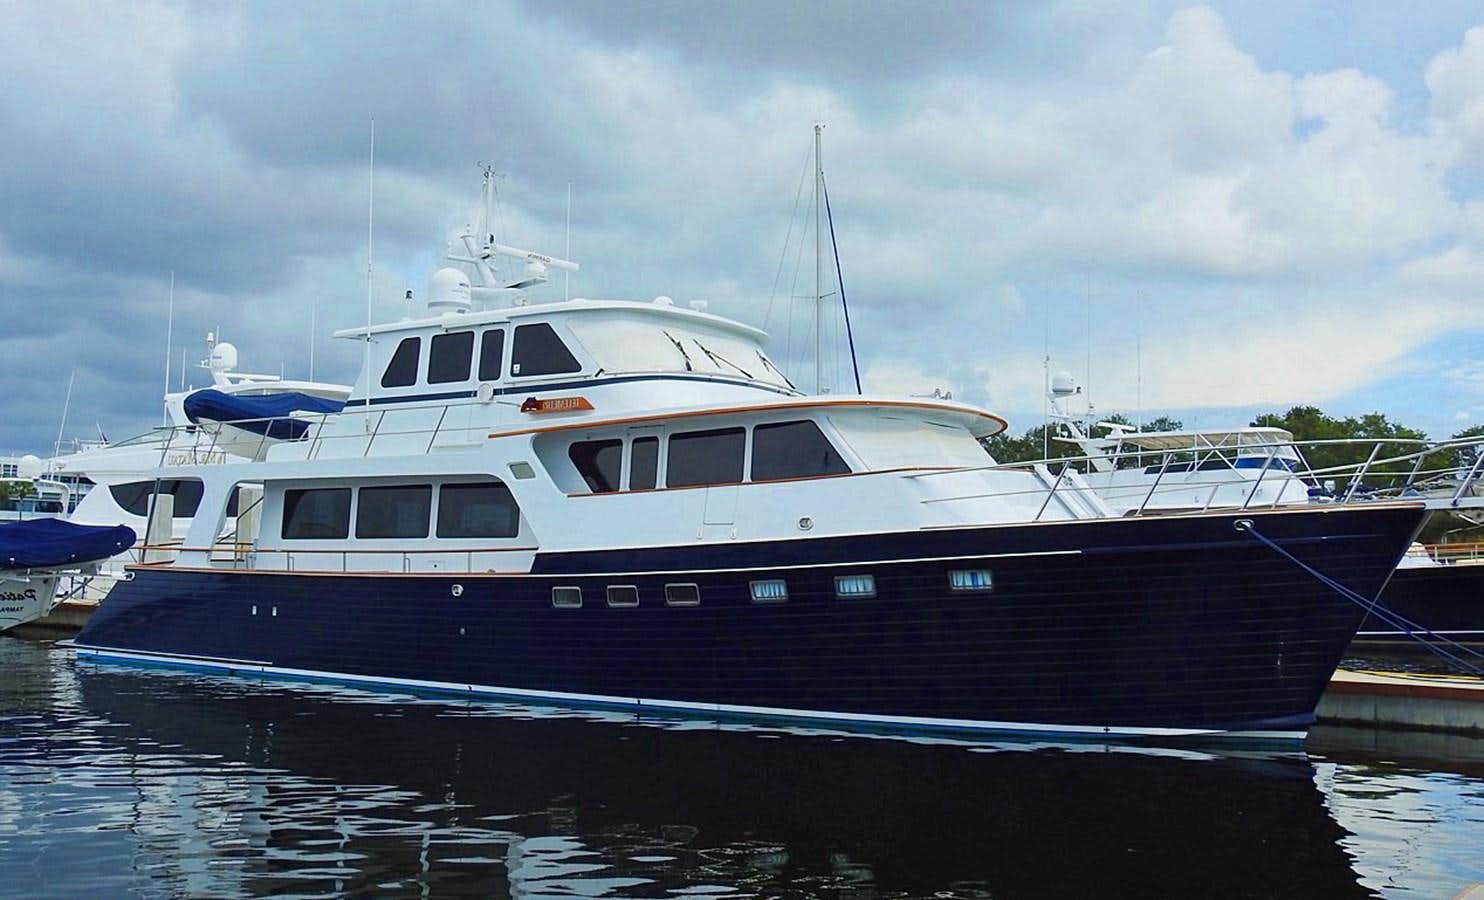 Telemetry
Yacht for Sale